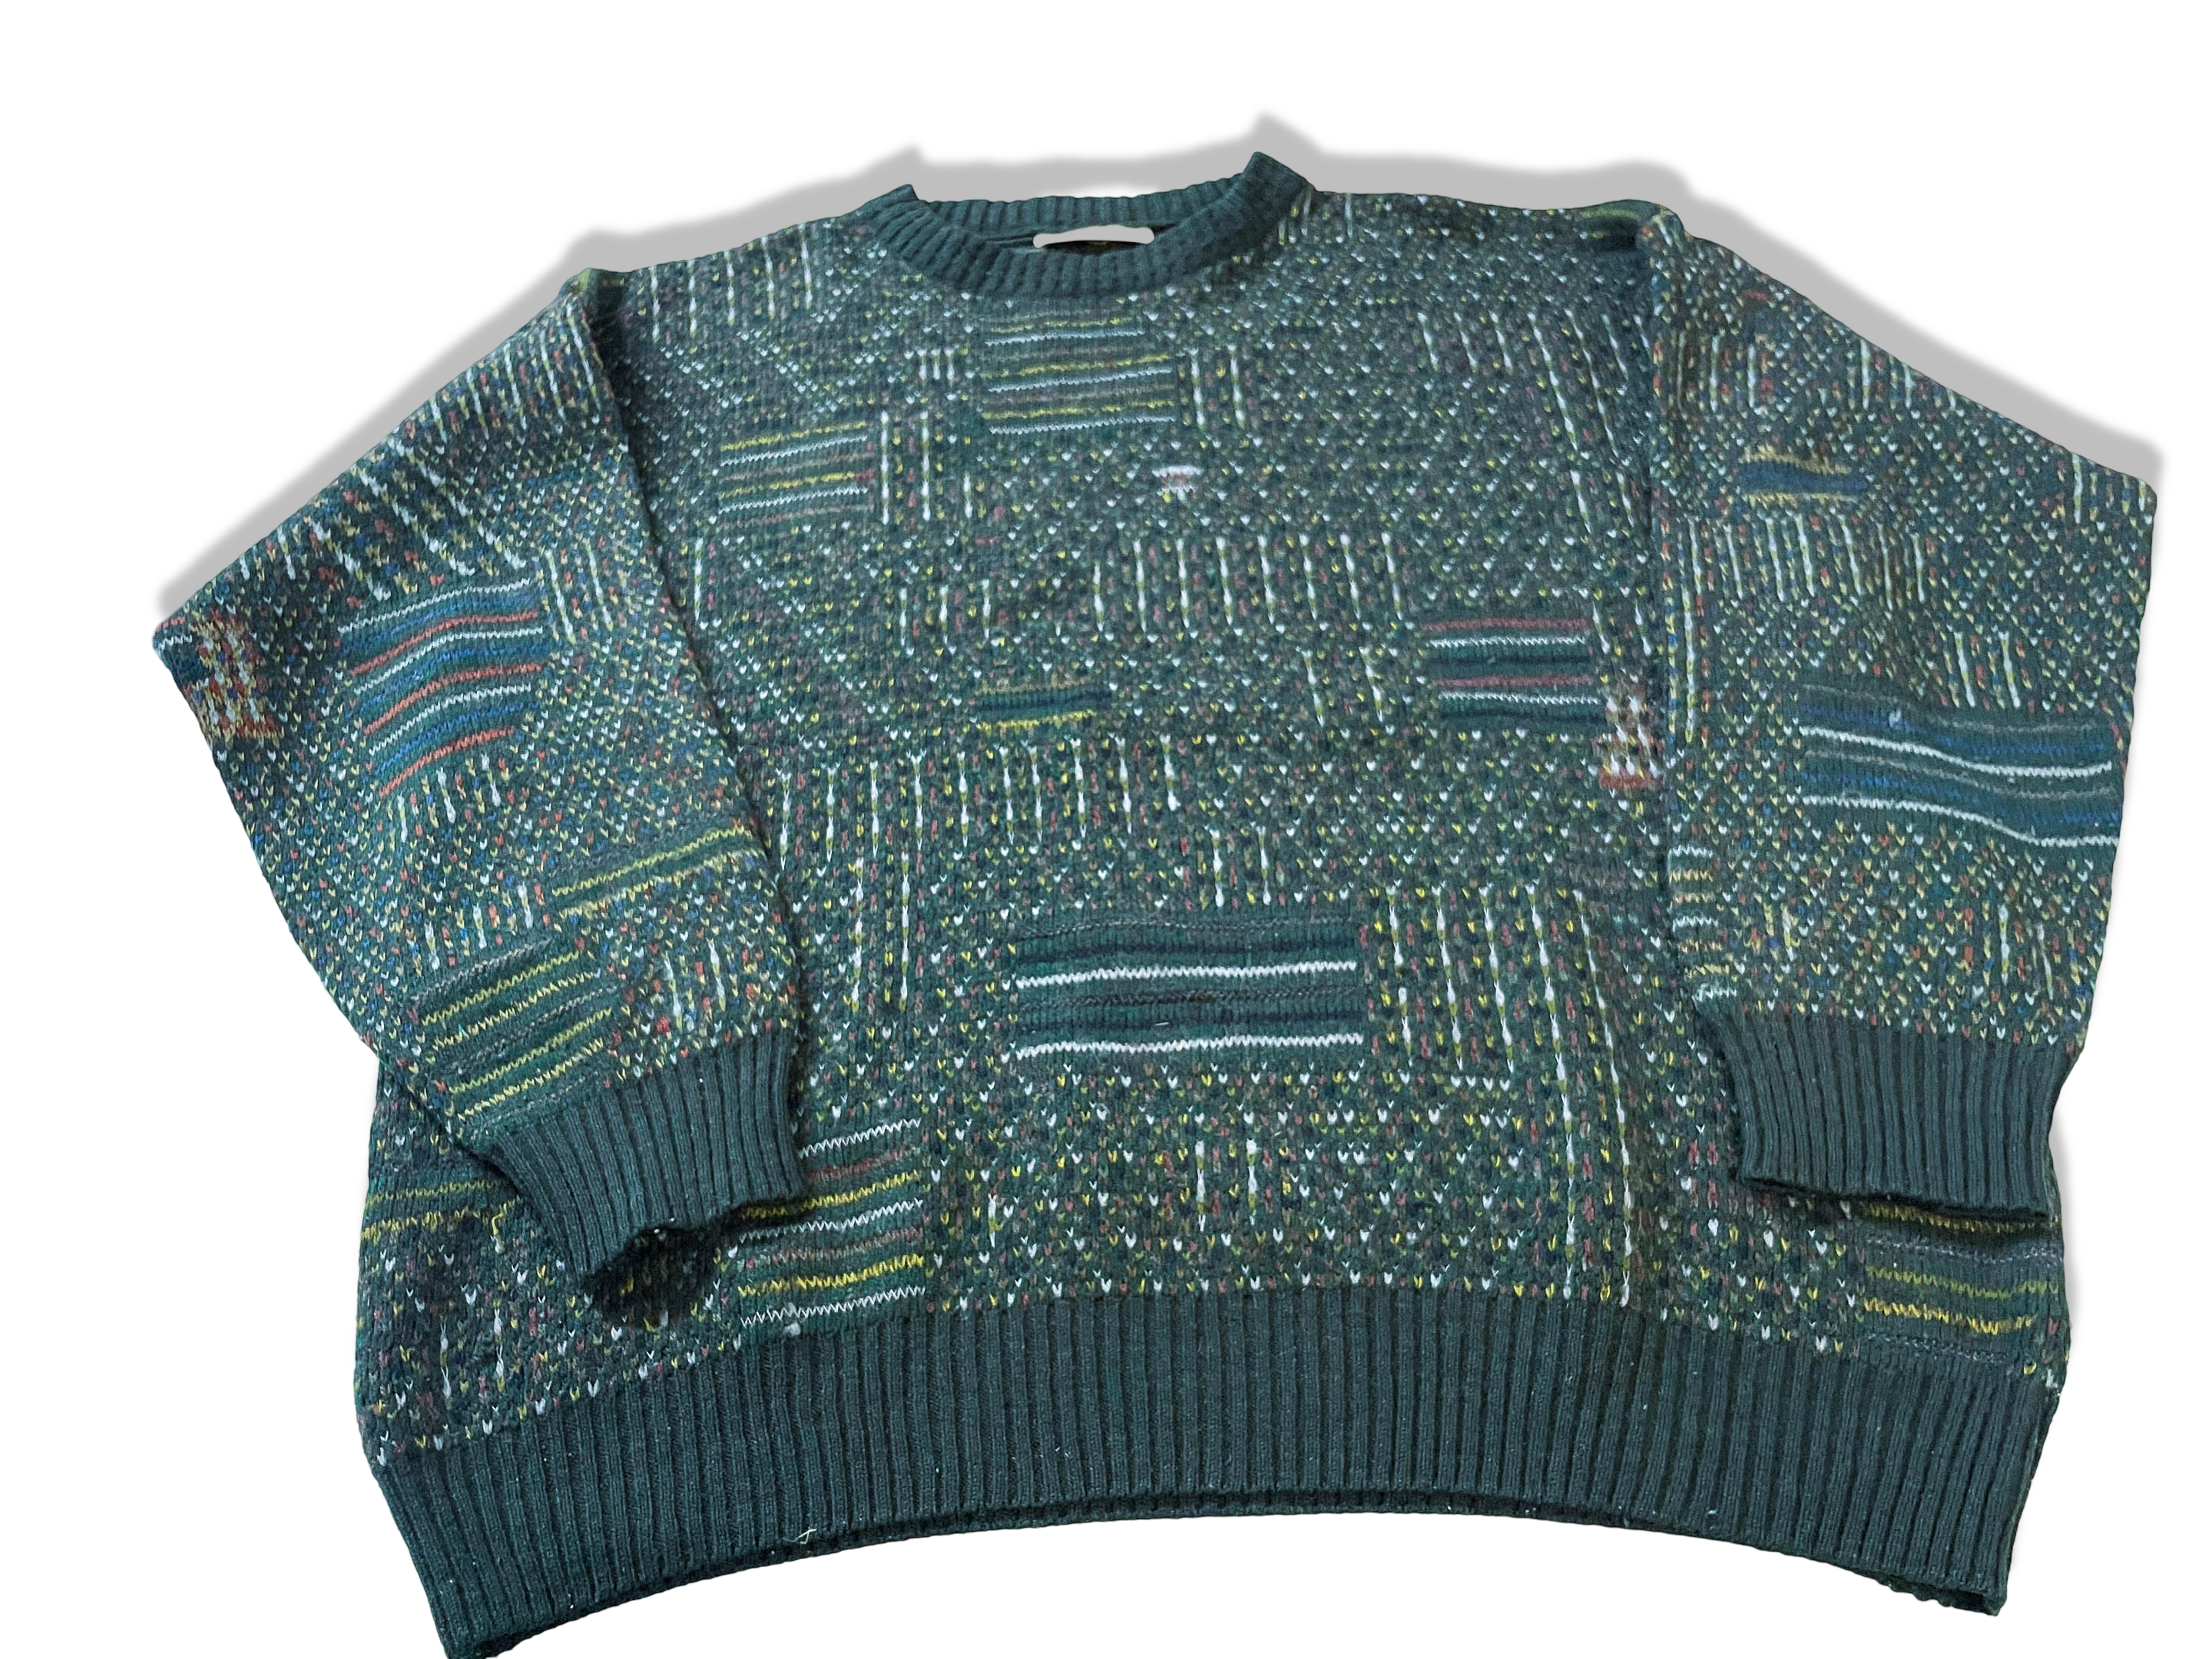 Vintage Sands made in Italy green geometric print knitted sweater in L|L27 W22|SKU 3996